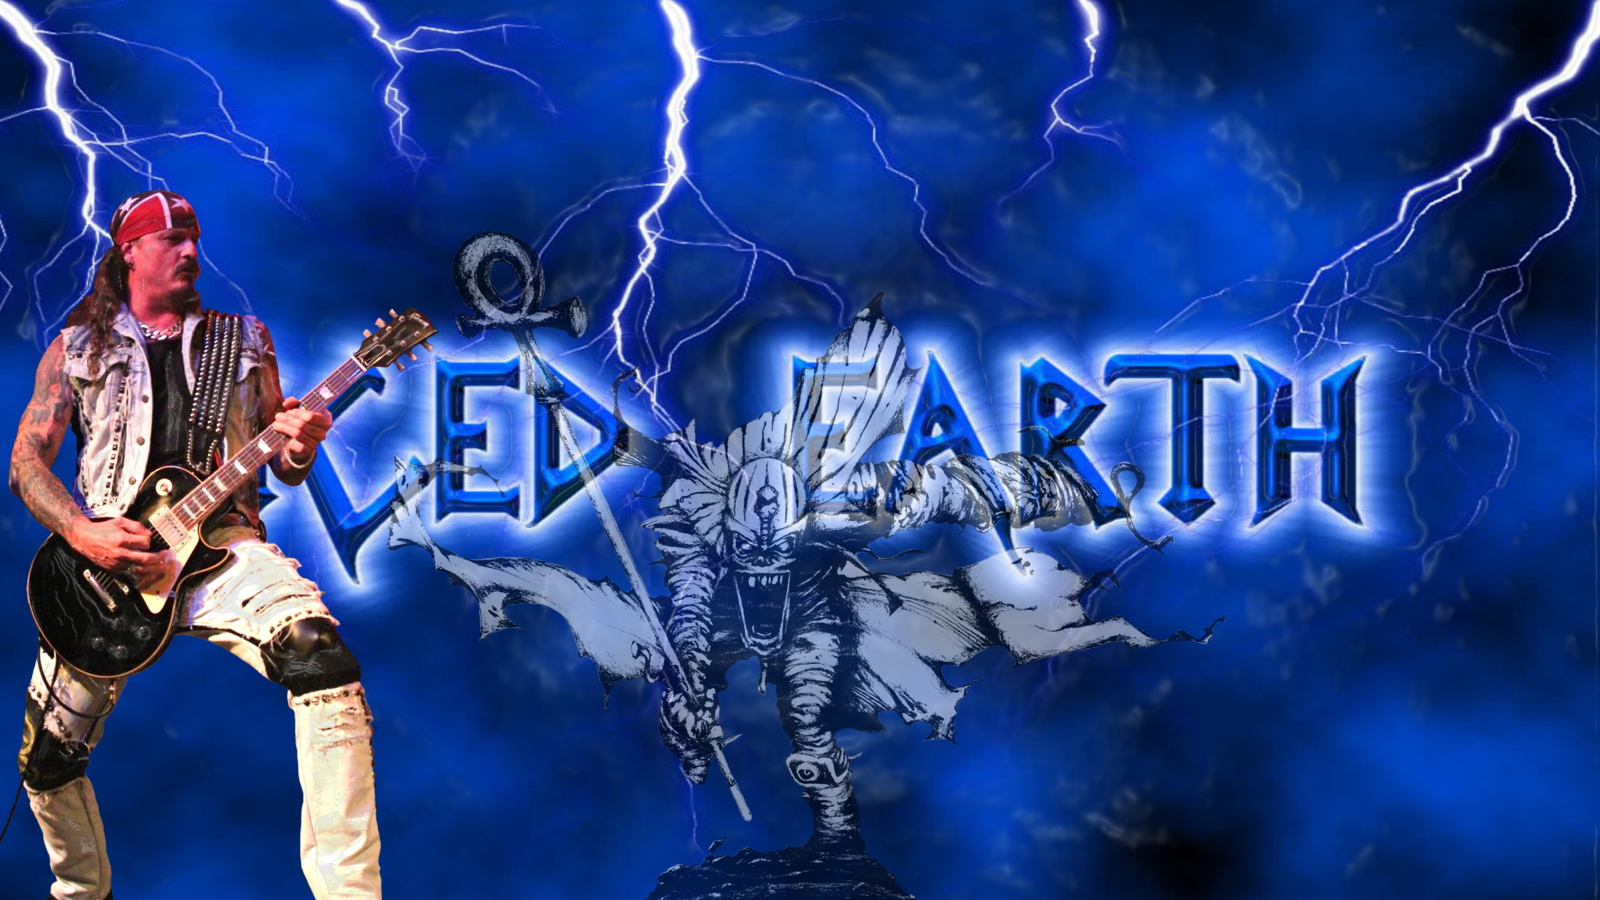 iced, Earth, Heavy, Metal, Hard, Rock, Groups, Bands, Album, Covers, Tattoo, Guitars Wallpaper